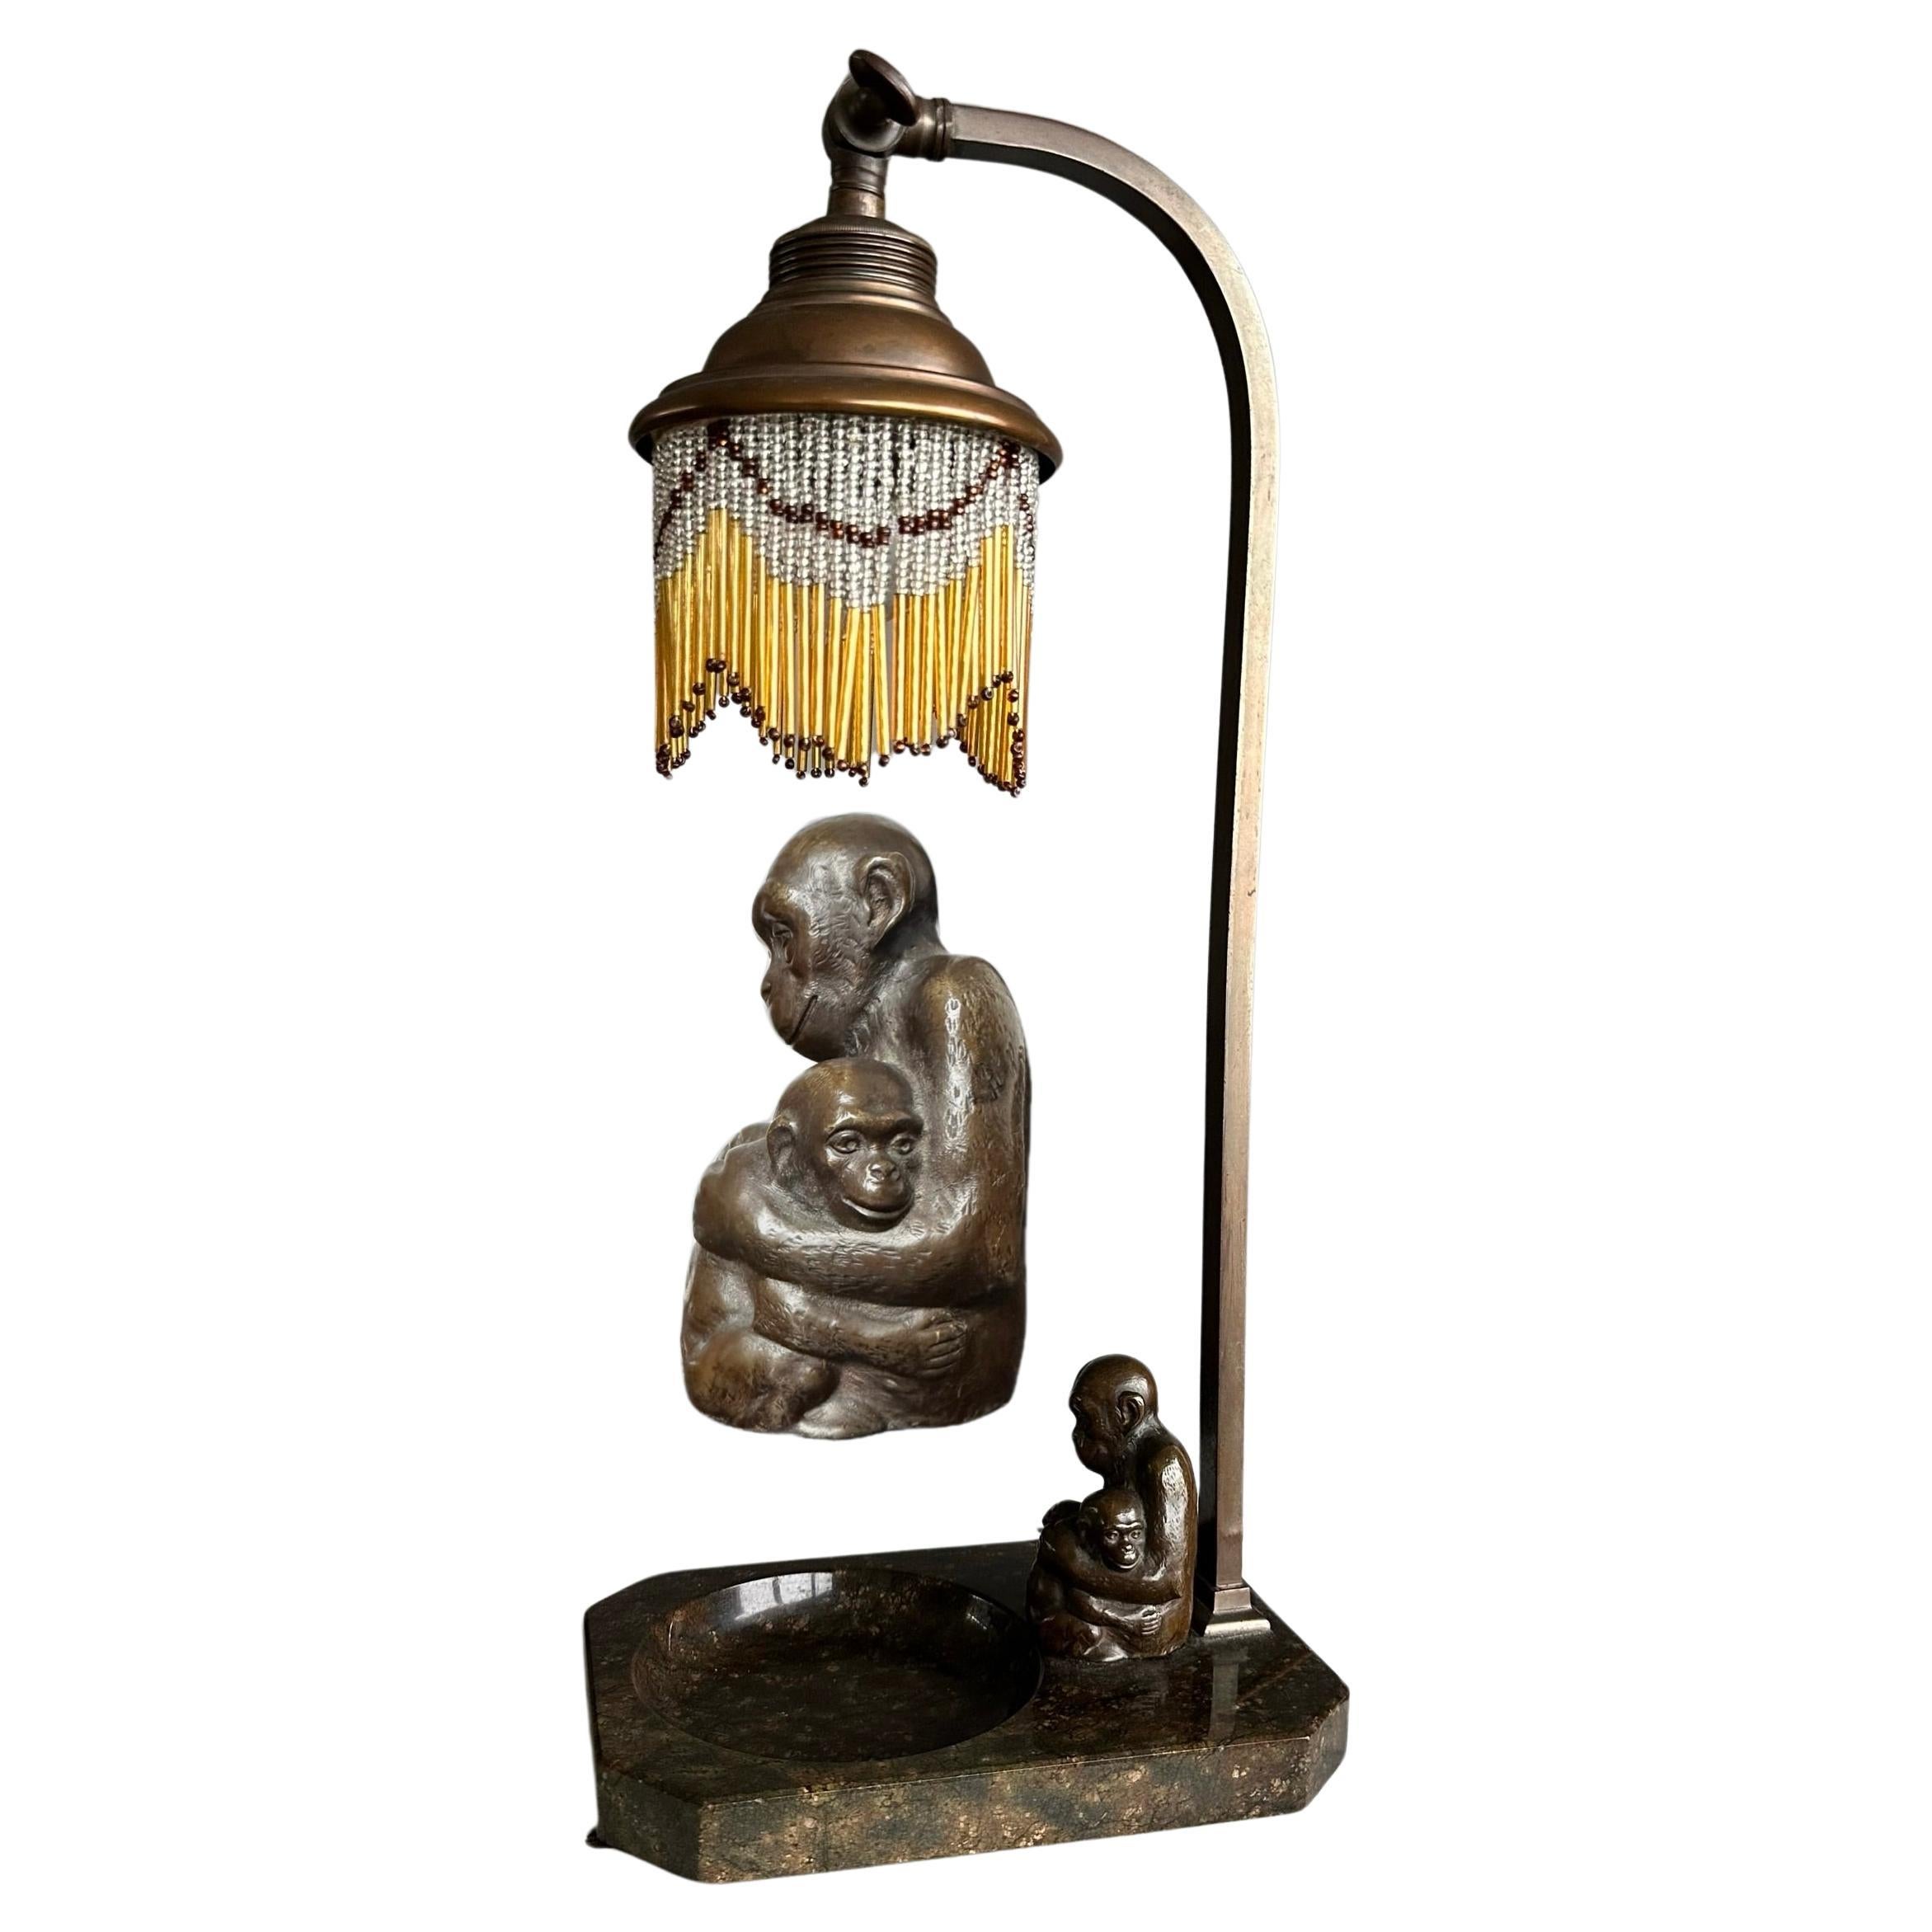 Very Decorative & Artistic Table Desk Lamp with Bronze Grooming Chimps Sculpture For Sale